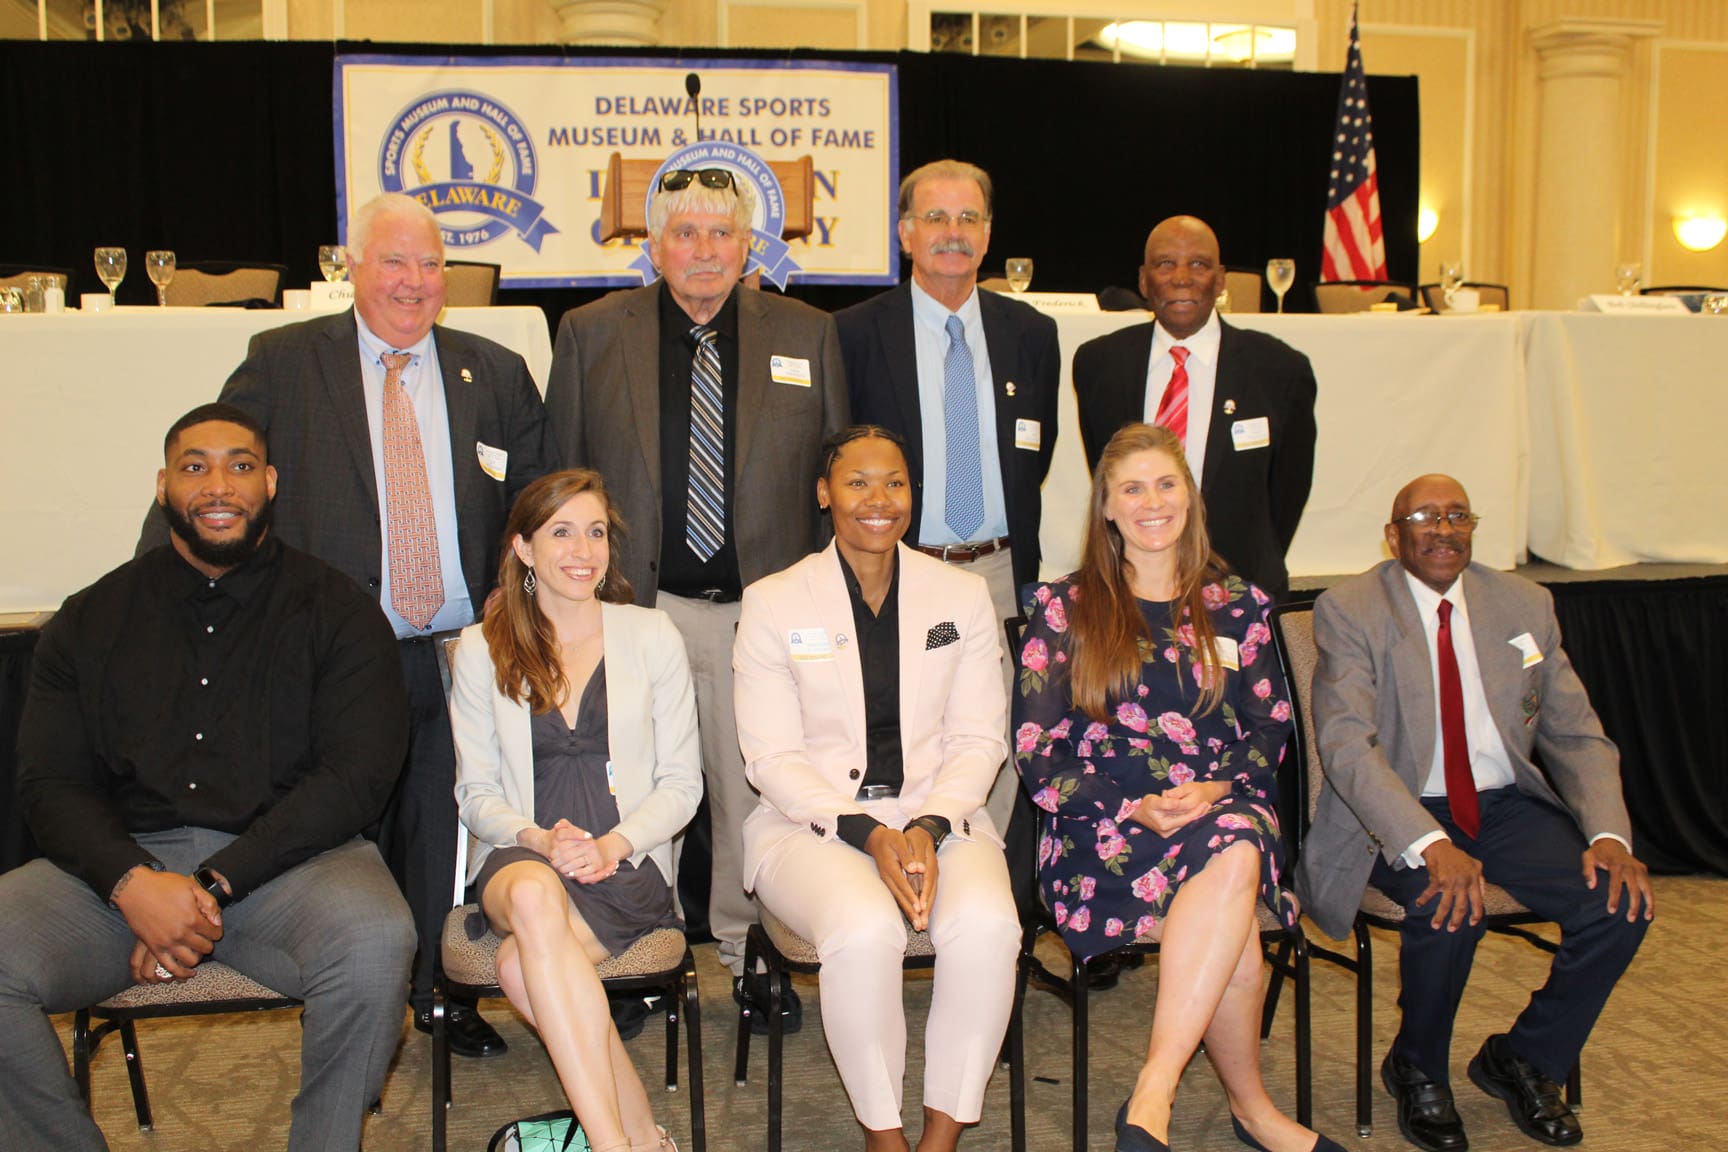 Featured image for “Meet the 2022 Delaware Sports Hall of Fame inductees”